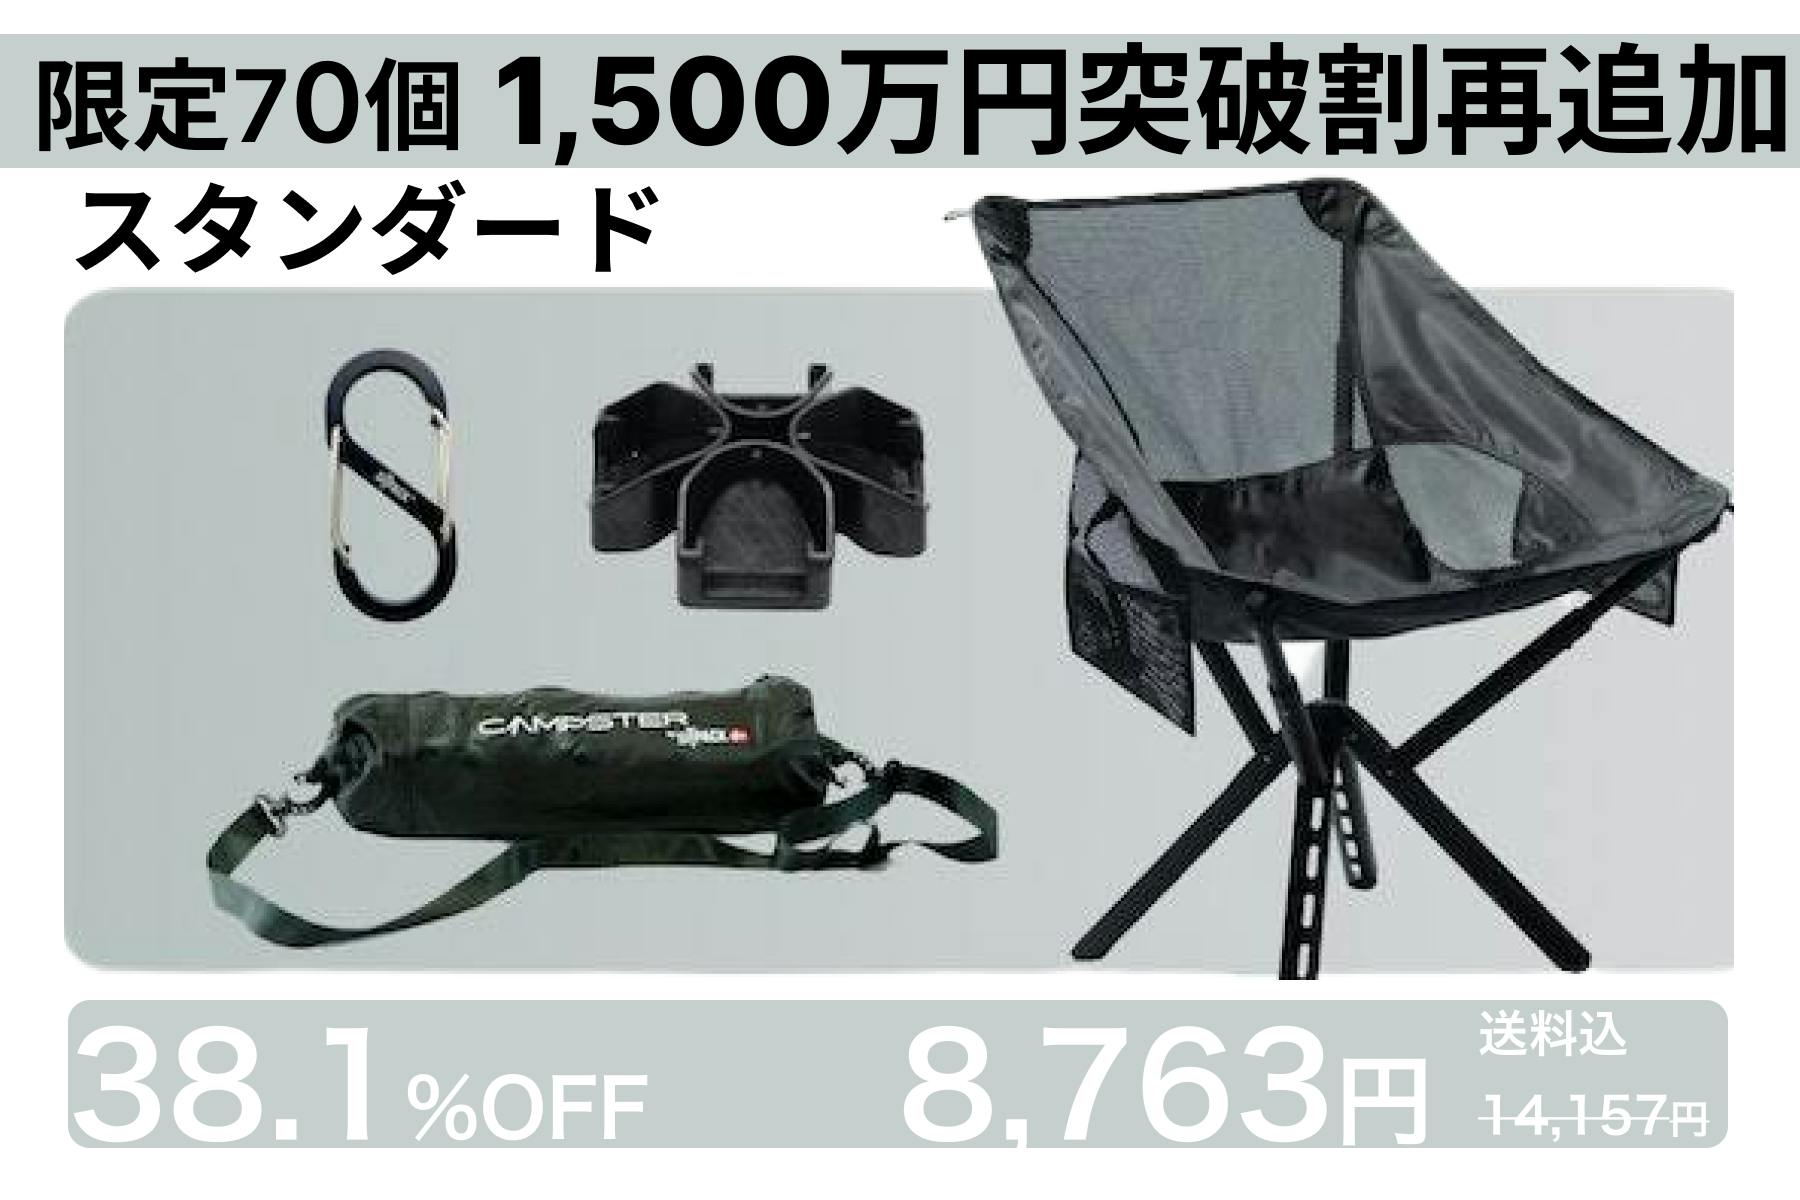 SITPACK CAMPSTER2 2脚セット　新品未使用　キャンプスター2